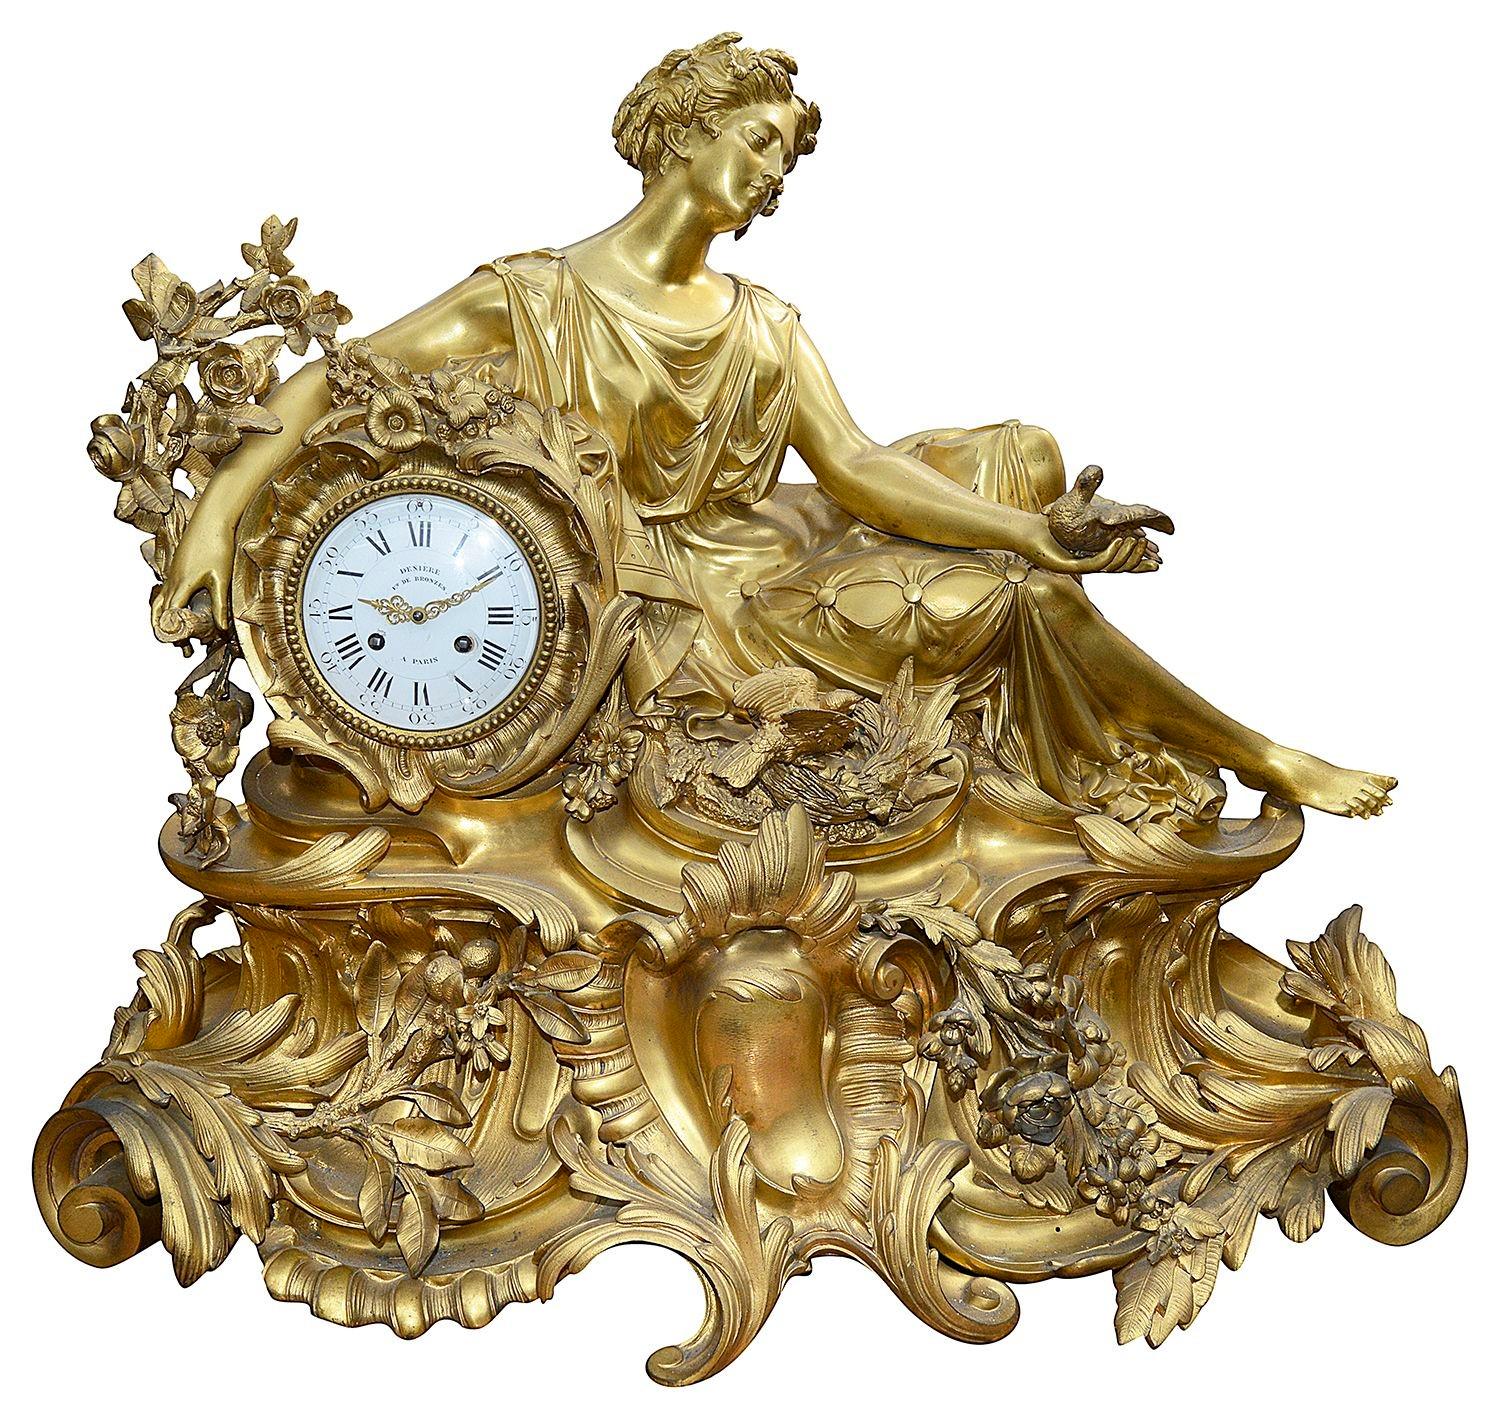 A wonderfully impressive 19th Century French gilded ormolu clock garniture, by Deniere of Paris. The clock having a classical reclining maiden holding doves among flowers and foliage. The white enamel clock face, the eight day duration movement,